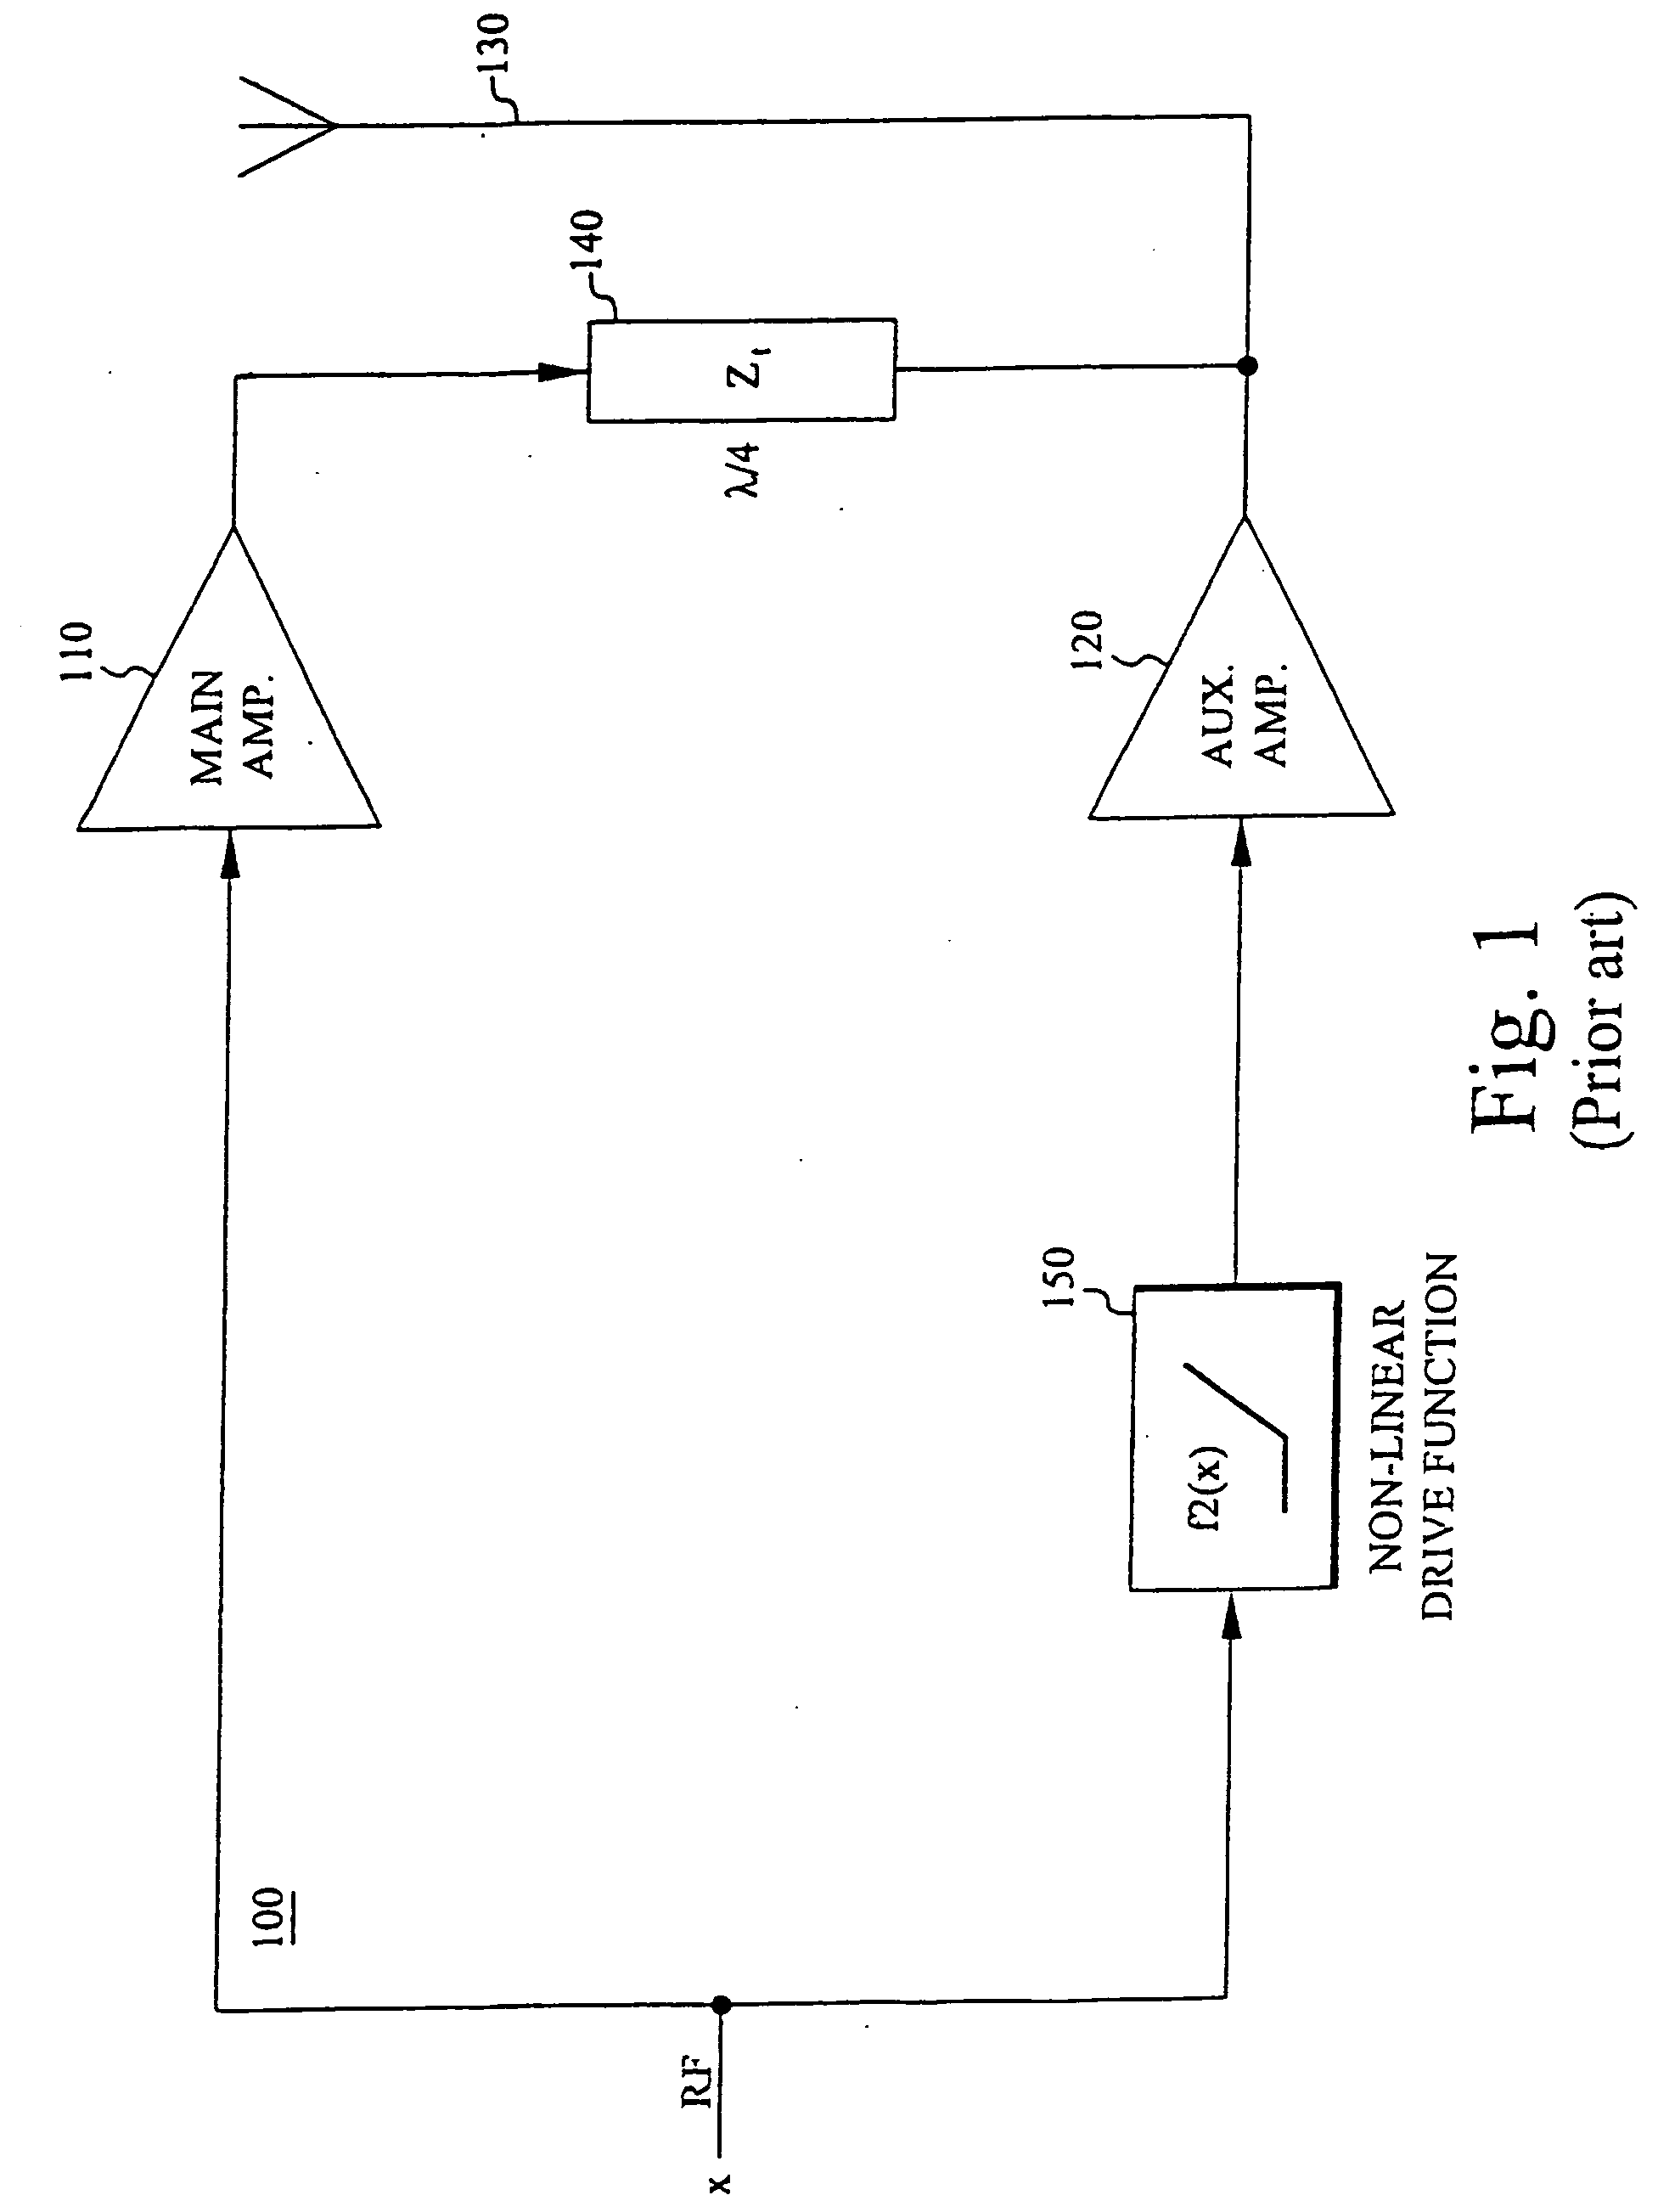 Composite amplifier with optimized linearity and efficiency